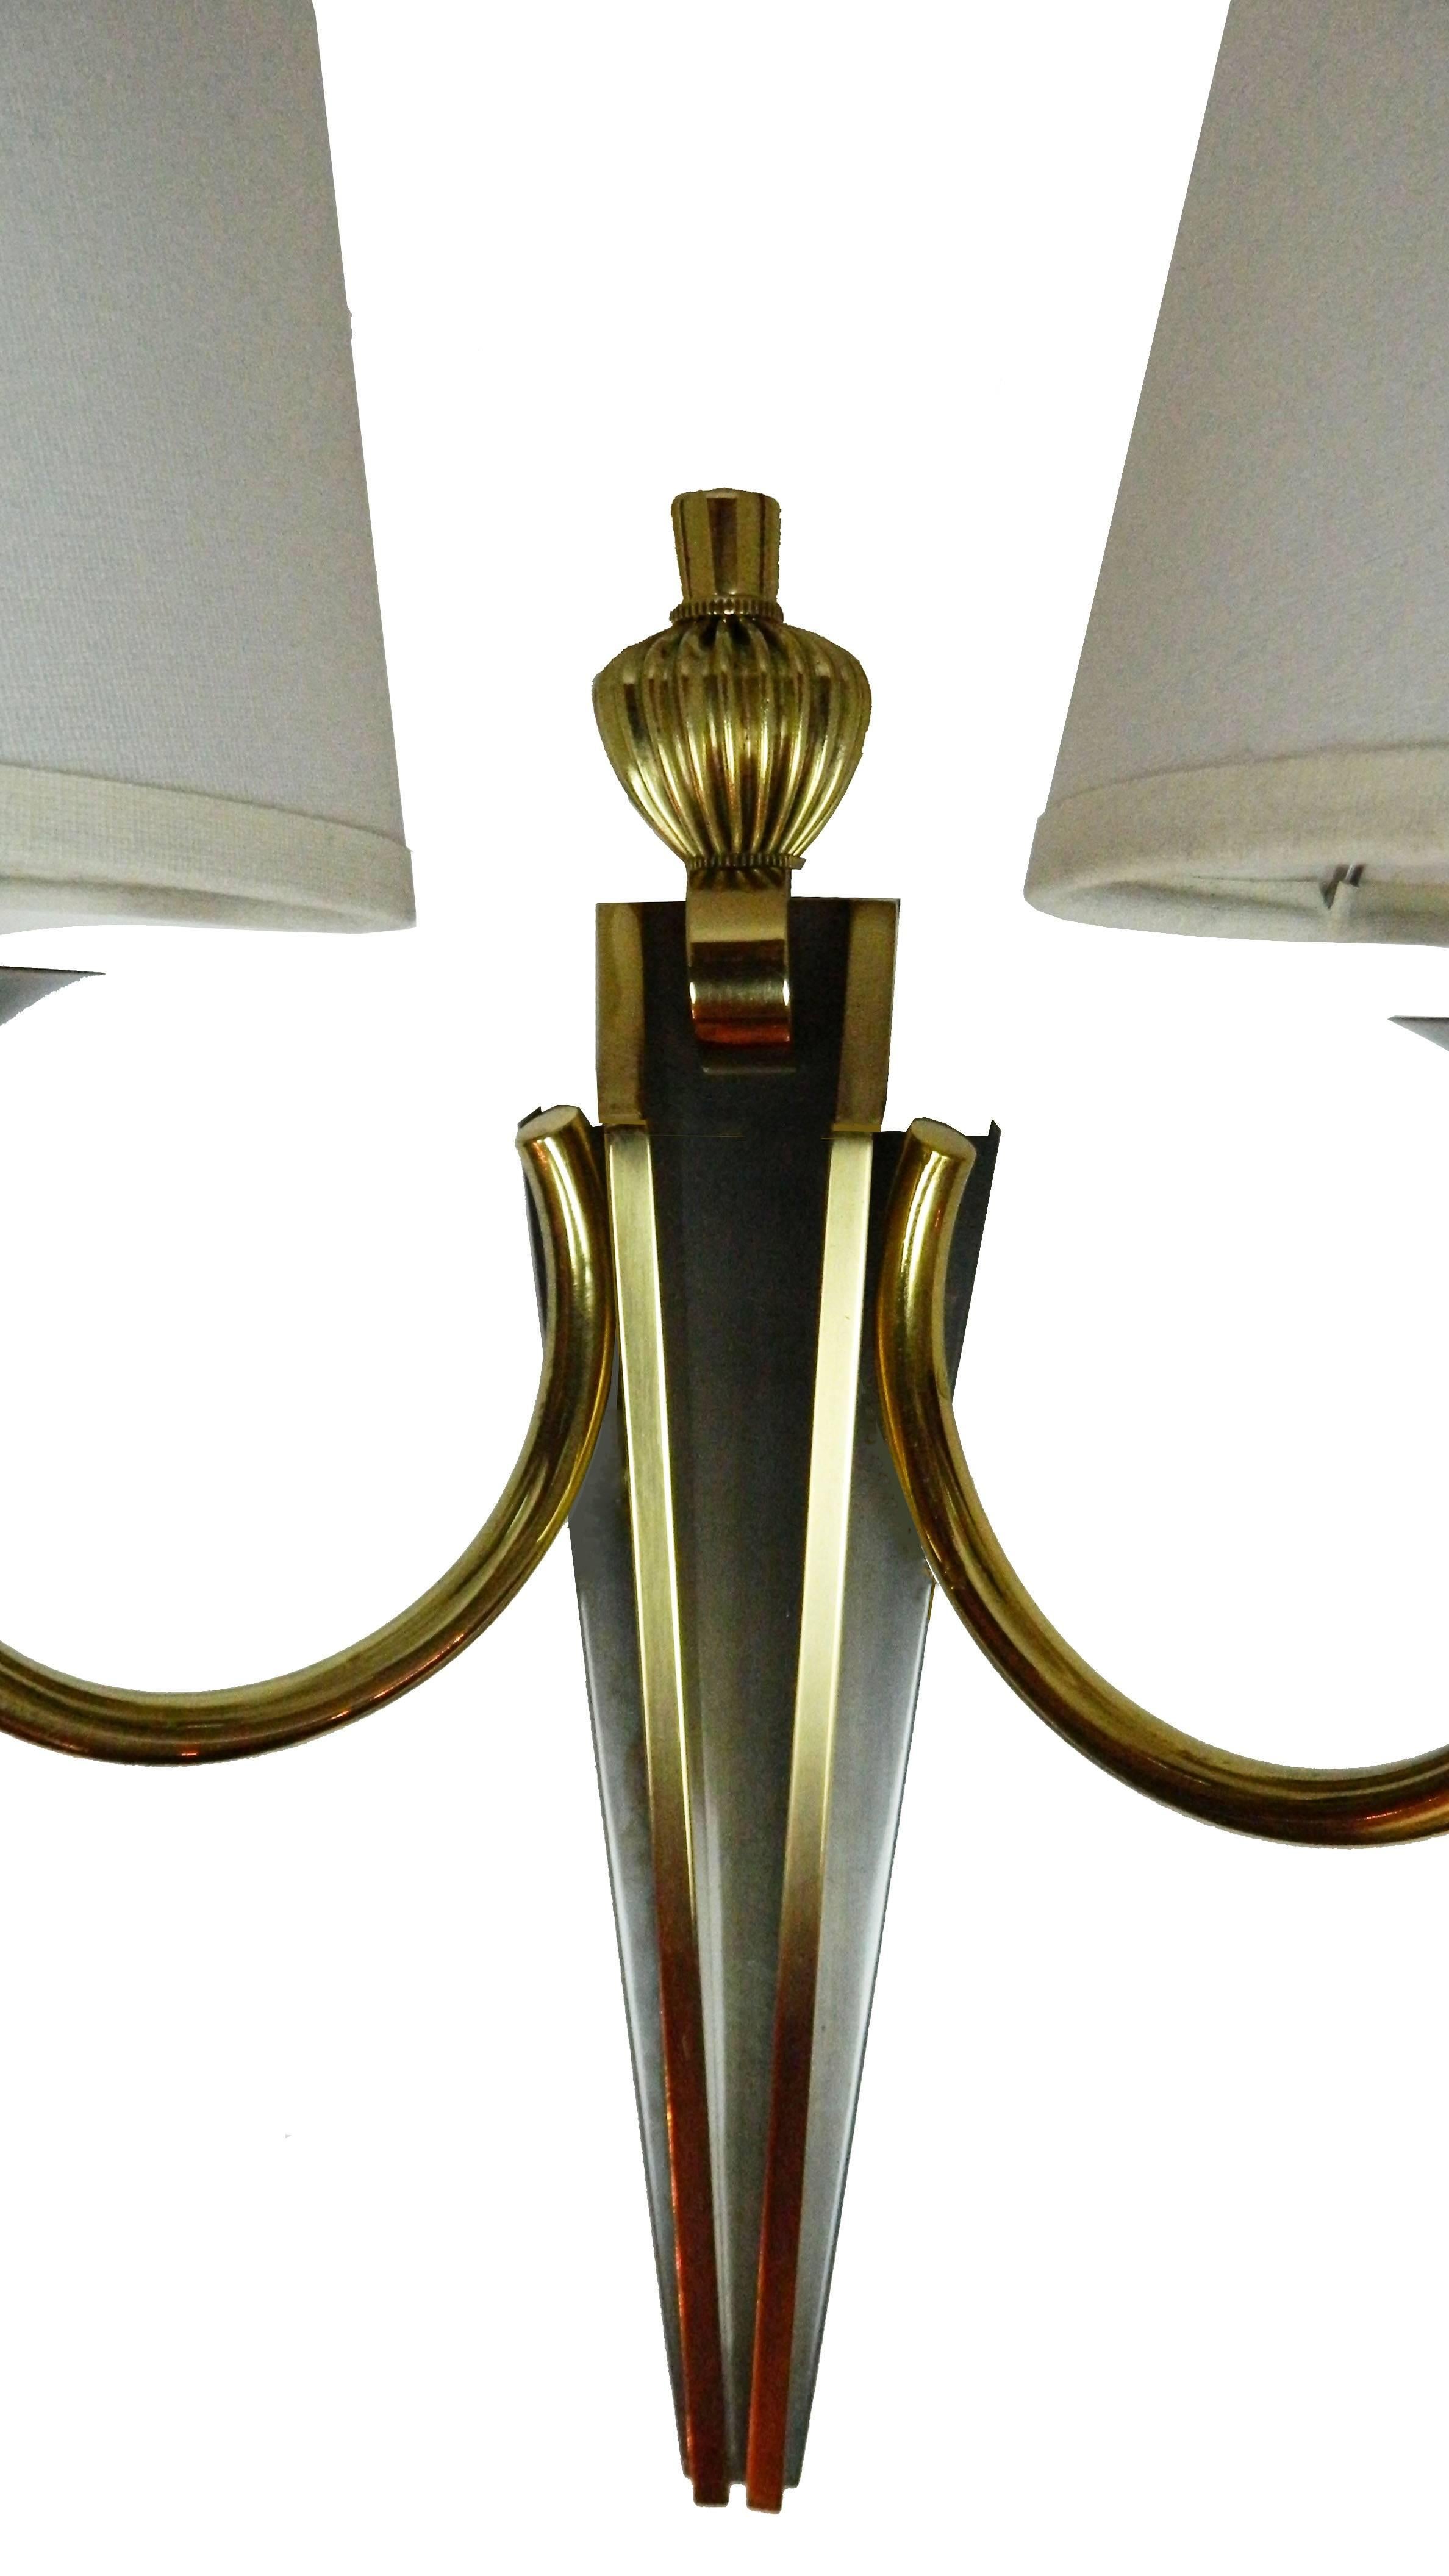 Superb two-tone brass and gun metal pair of sconces by Maison Jansen.
US rewired and in working condition.
Two bulb of 75 watts max.
Custom back plate available, ask for a quote.
Two pairs available (Four sconces).
Priced by pair.
Have a look